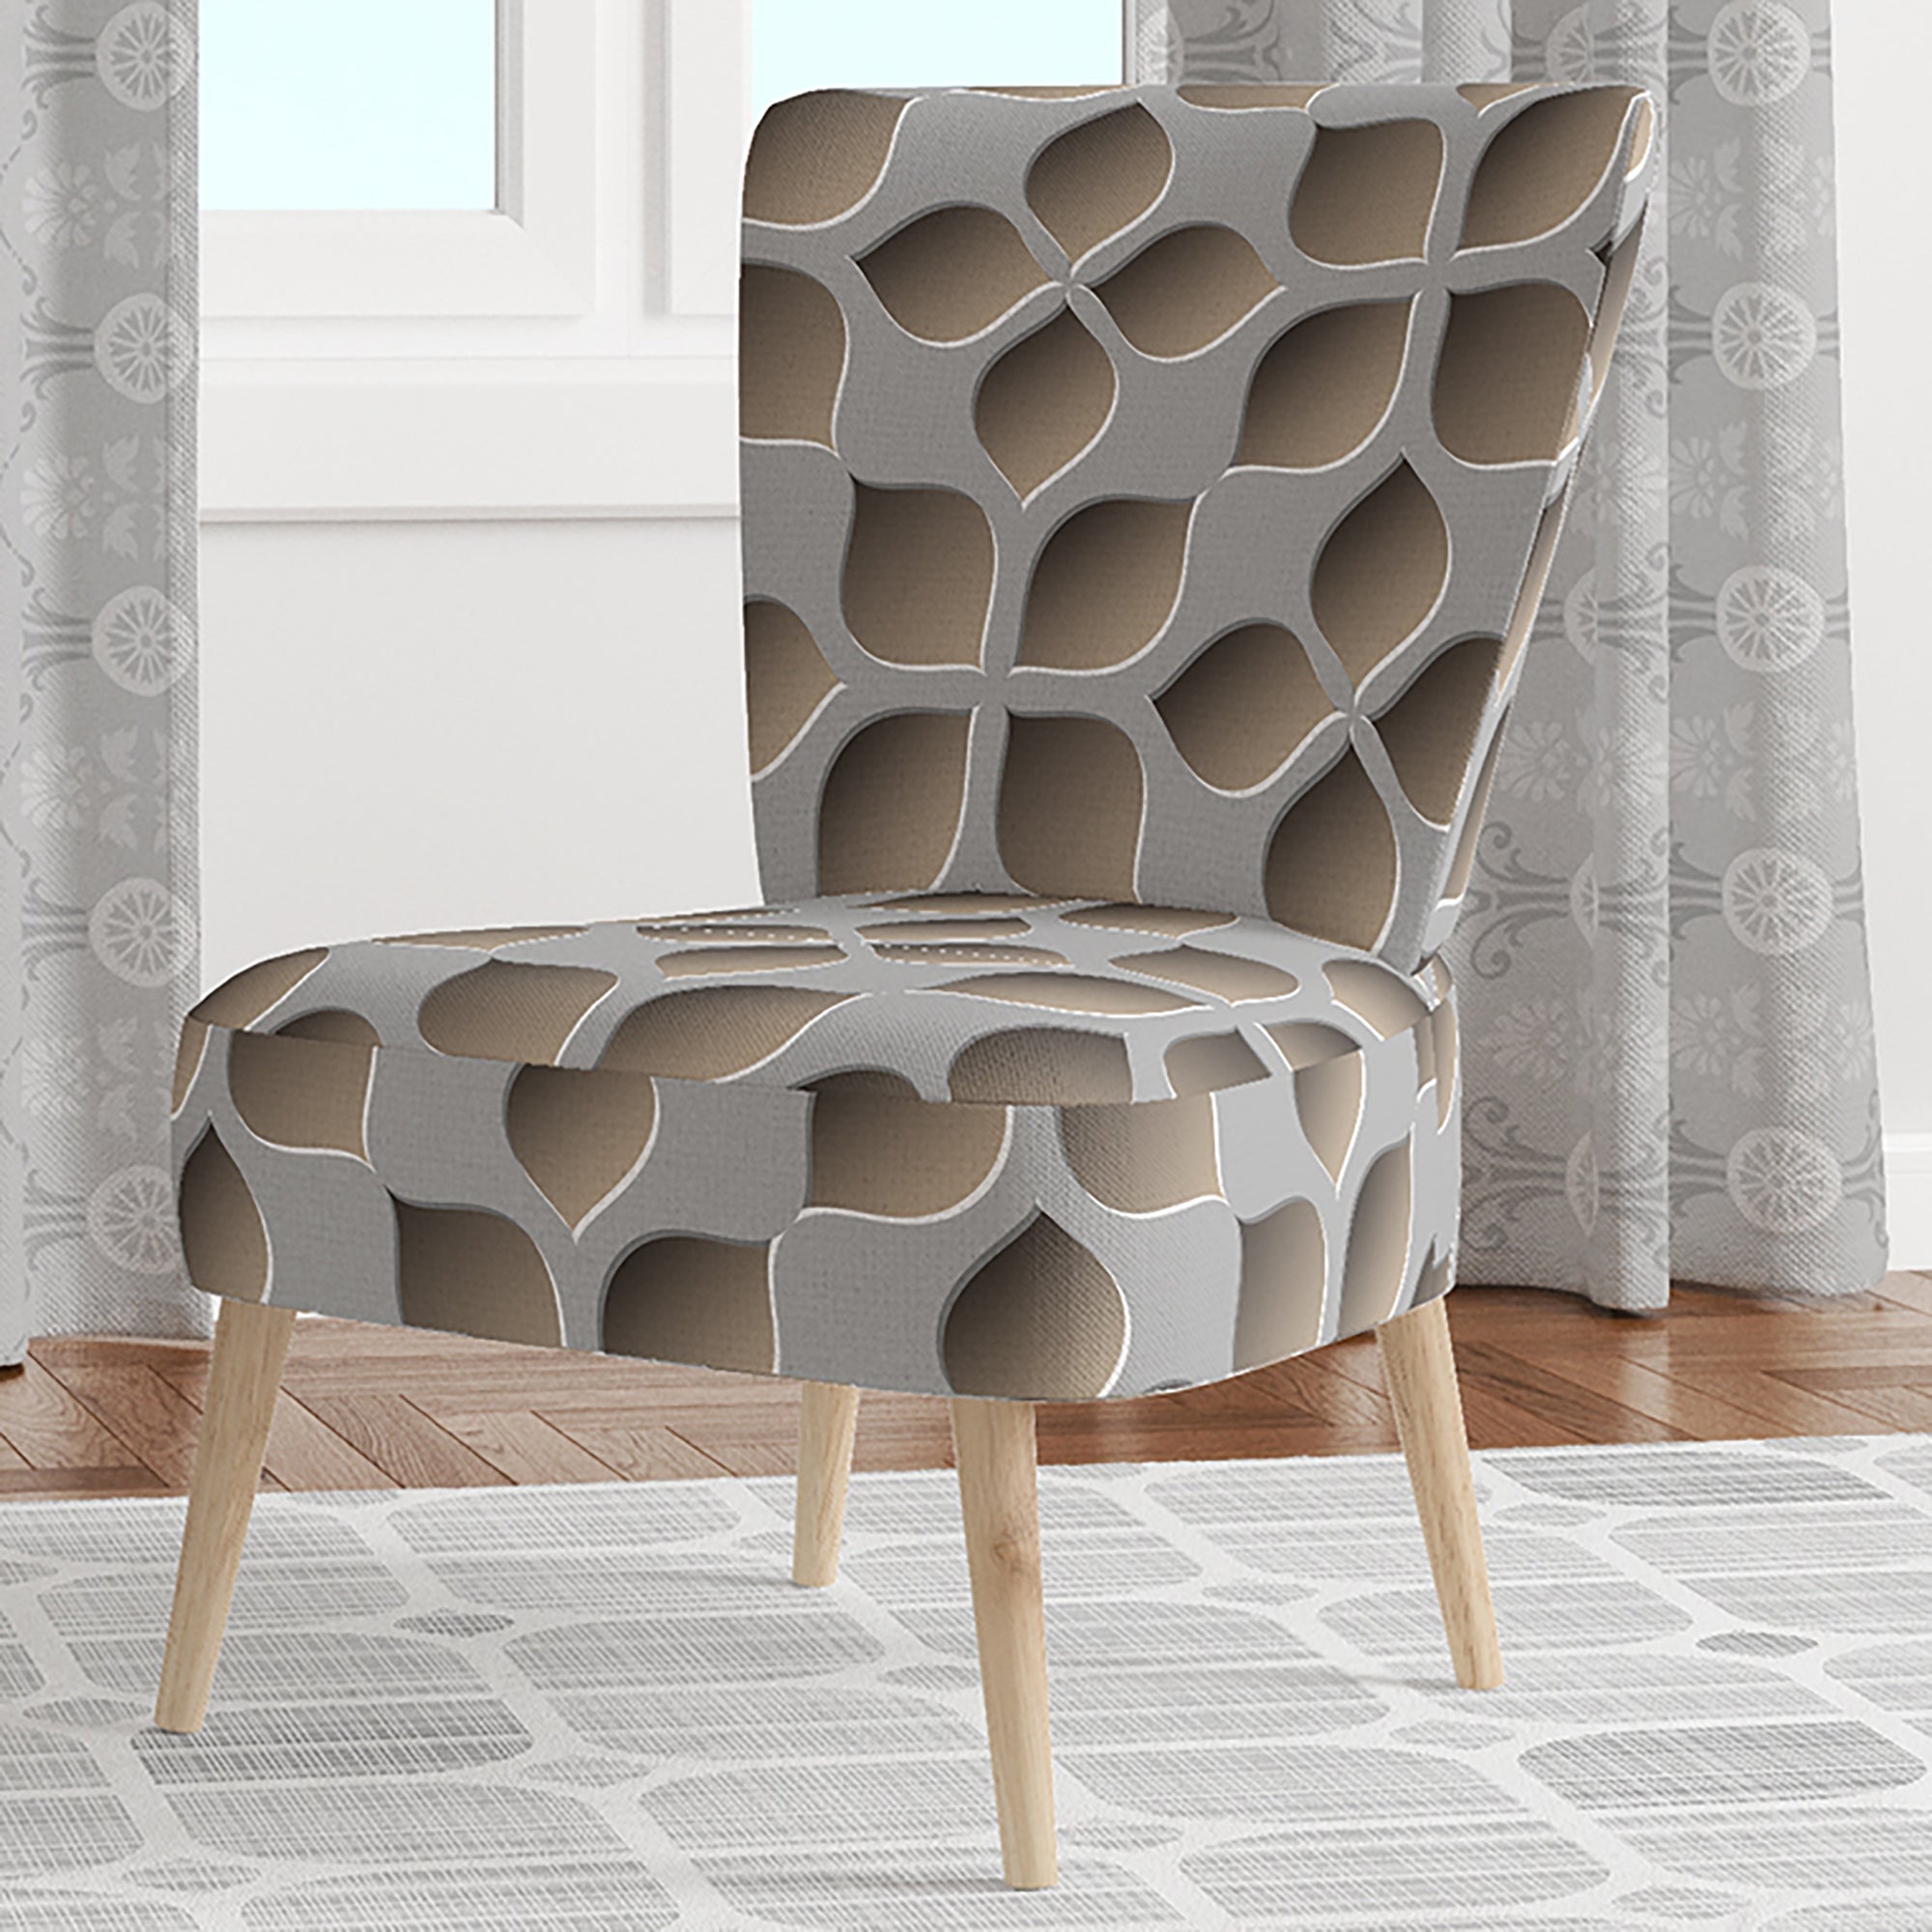 Abstract Pattern - Upholstered Scandinavian Accent Chair